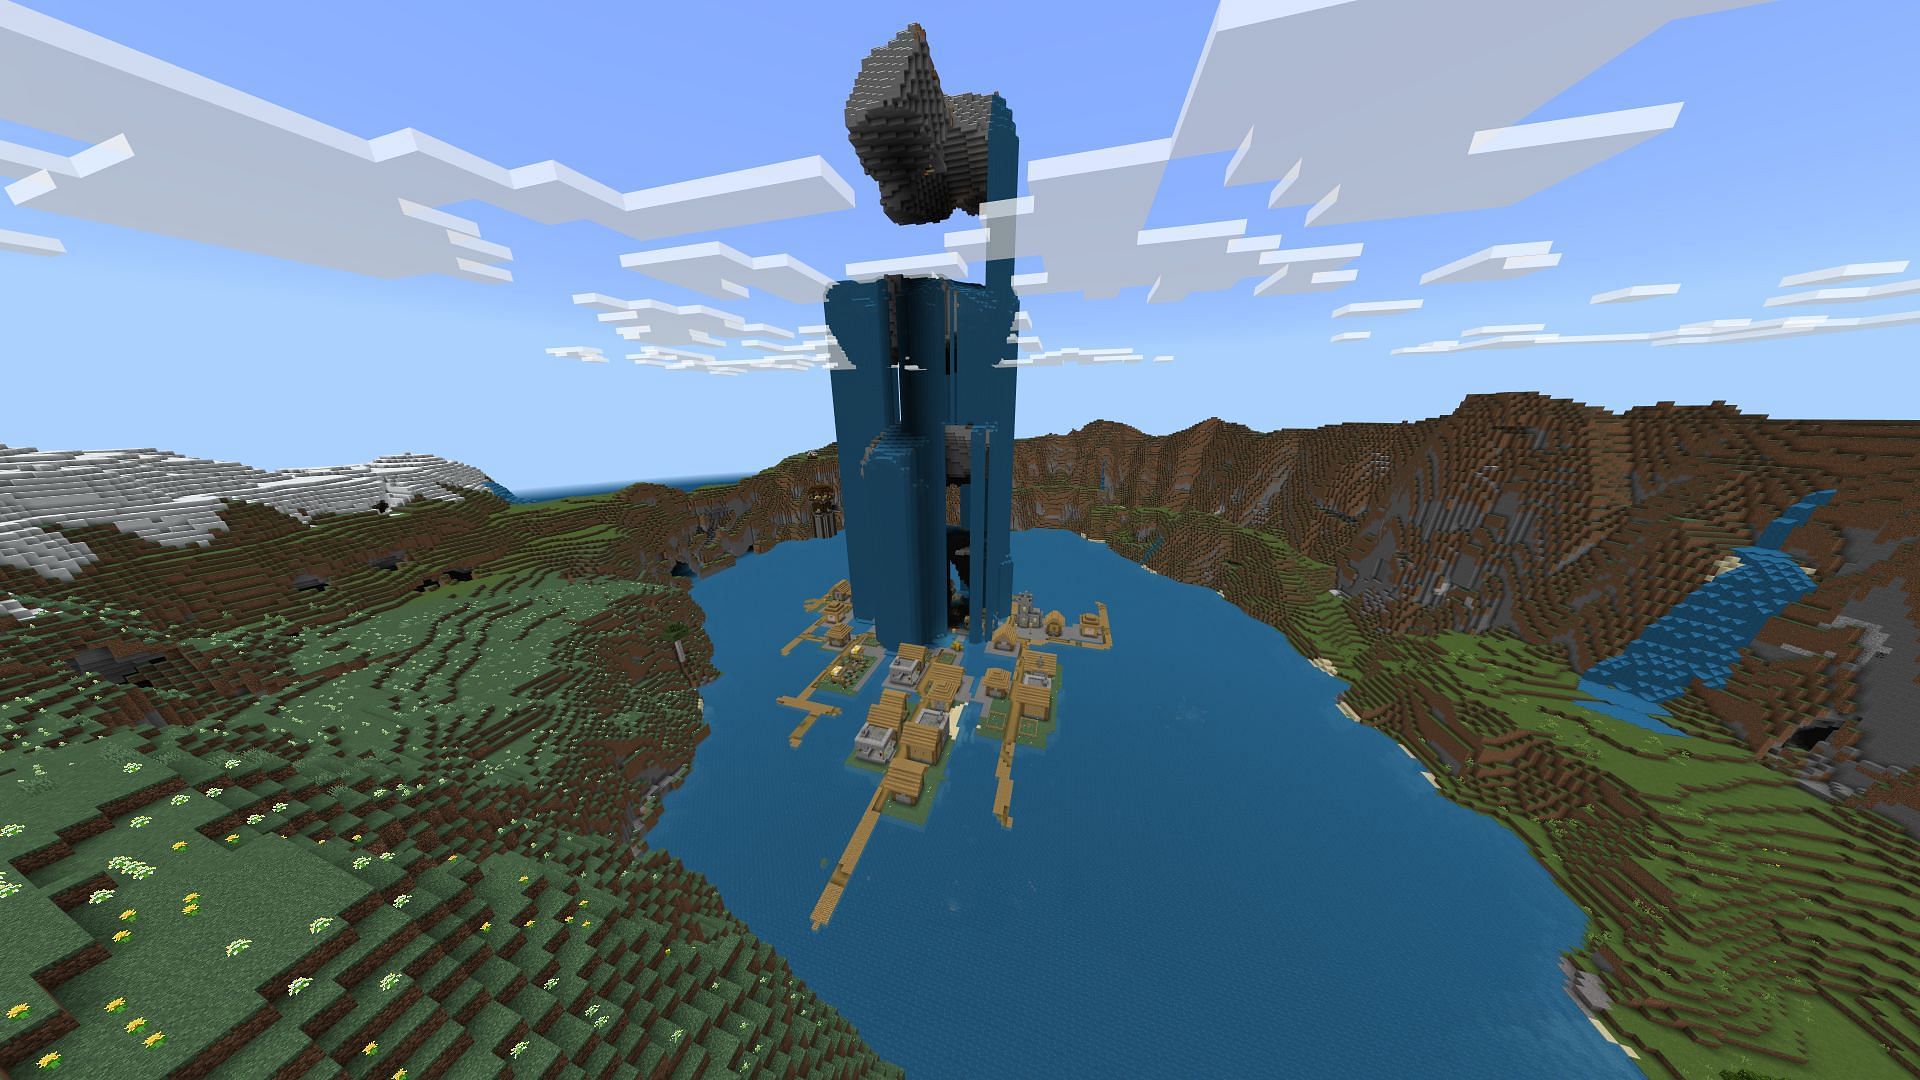 Minecraft villagers build their homes in some pretty strange places (Image via Mojang)